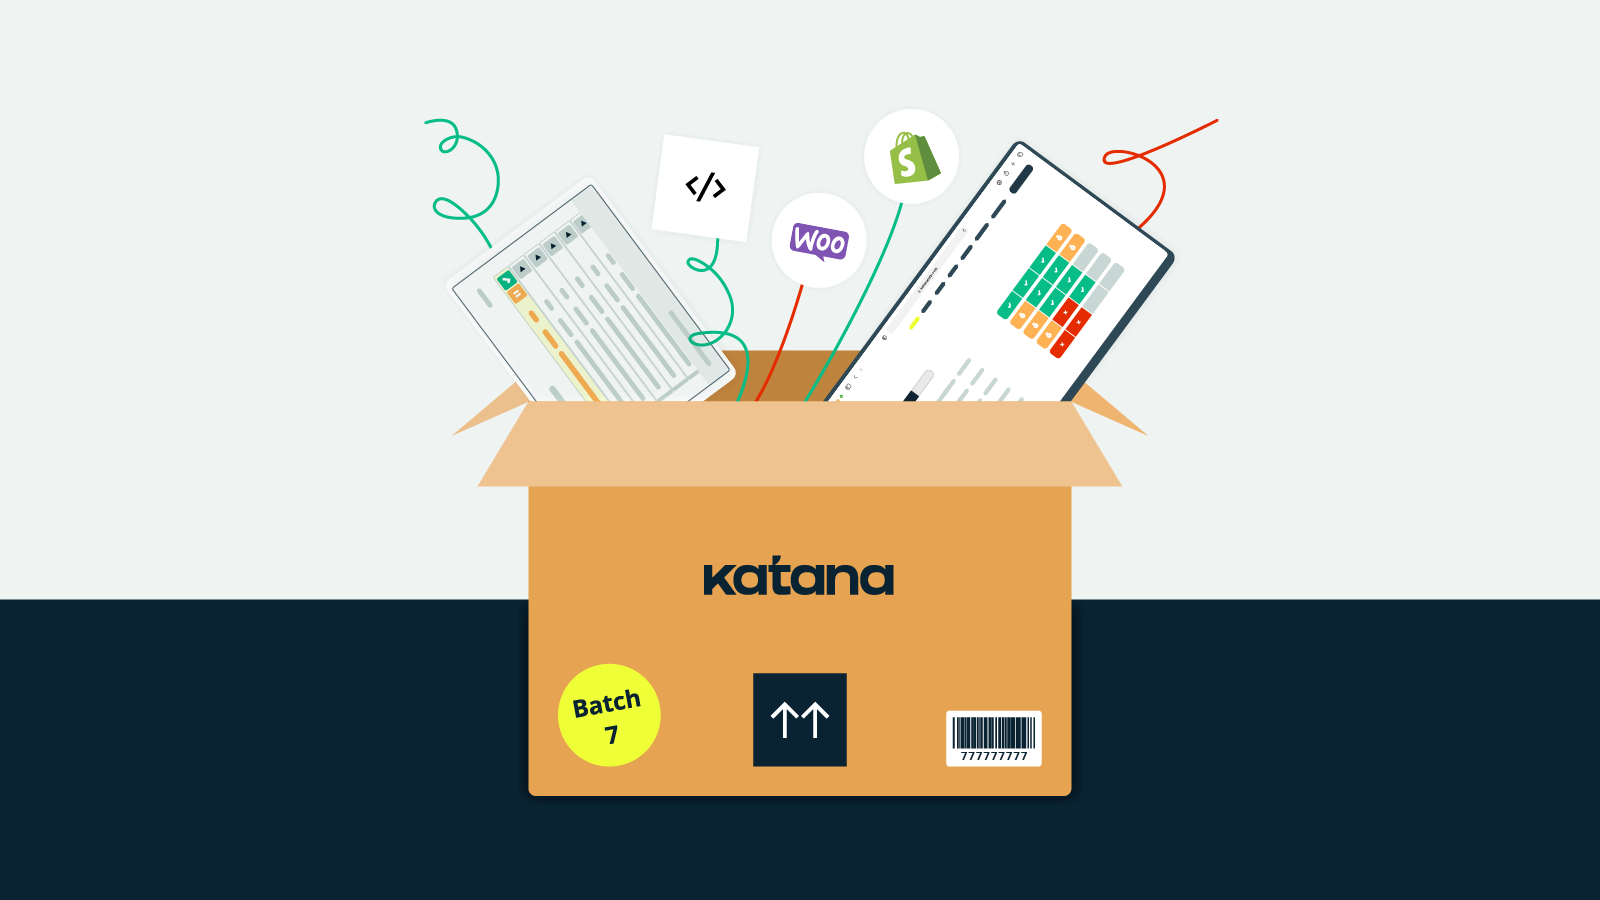 Katana manufacturing resource planning software helps you implement JIT